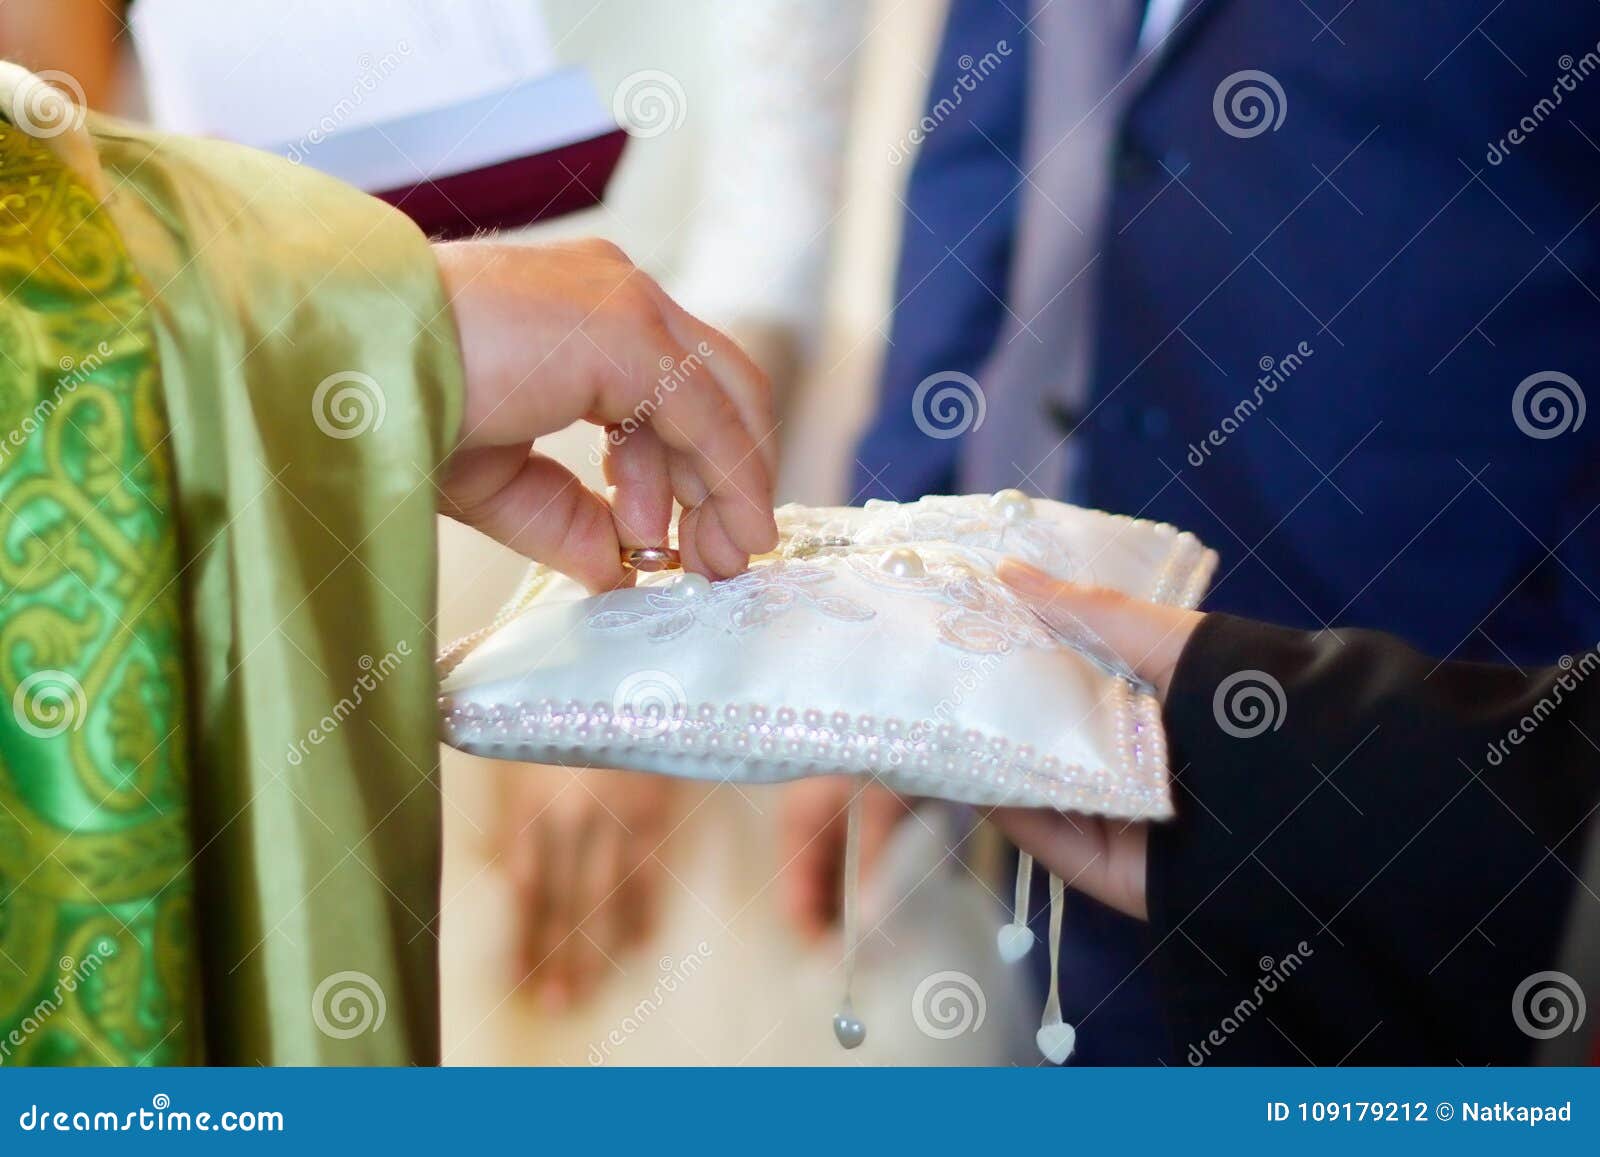 A Christian Priest Holds In His Hands A Wedding Ring